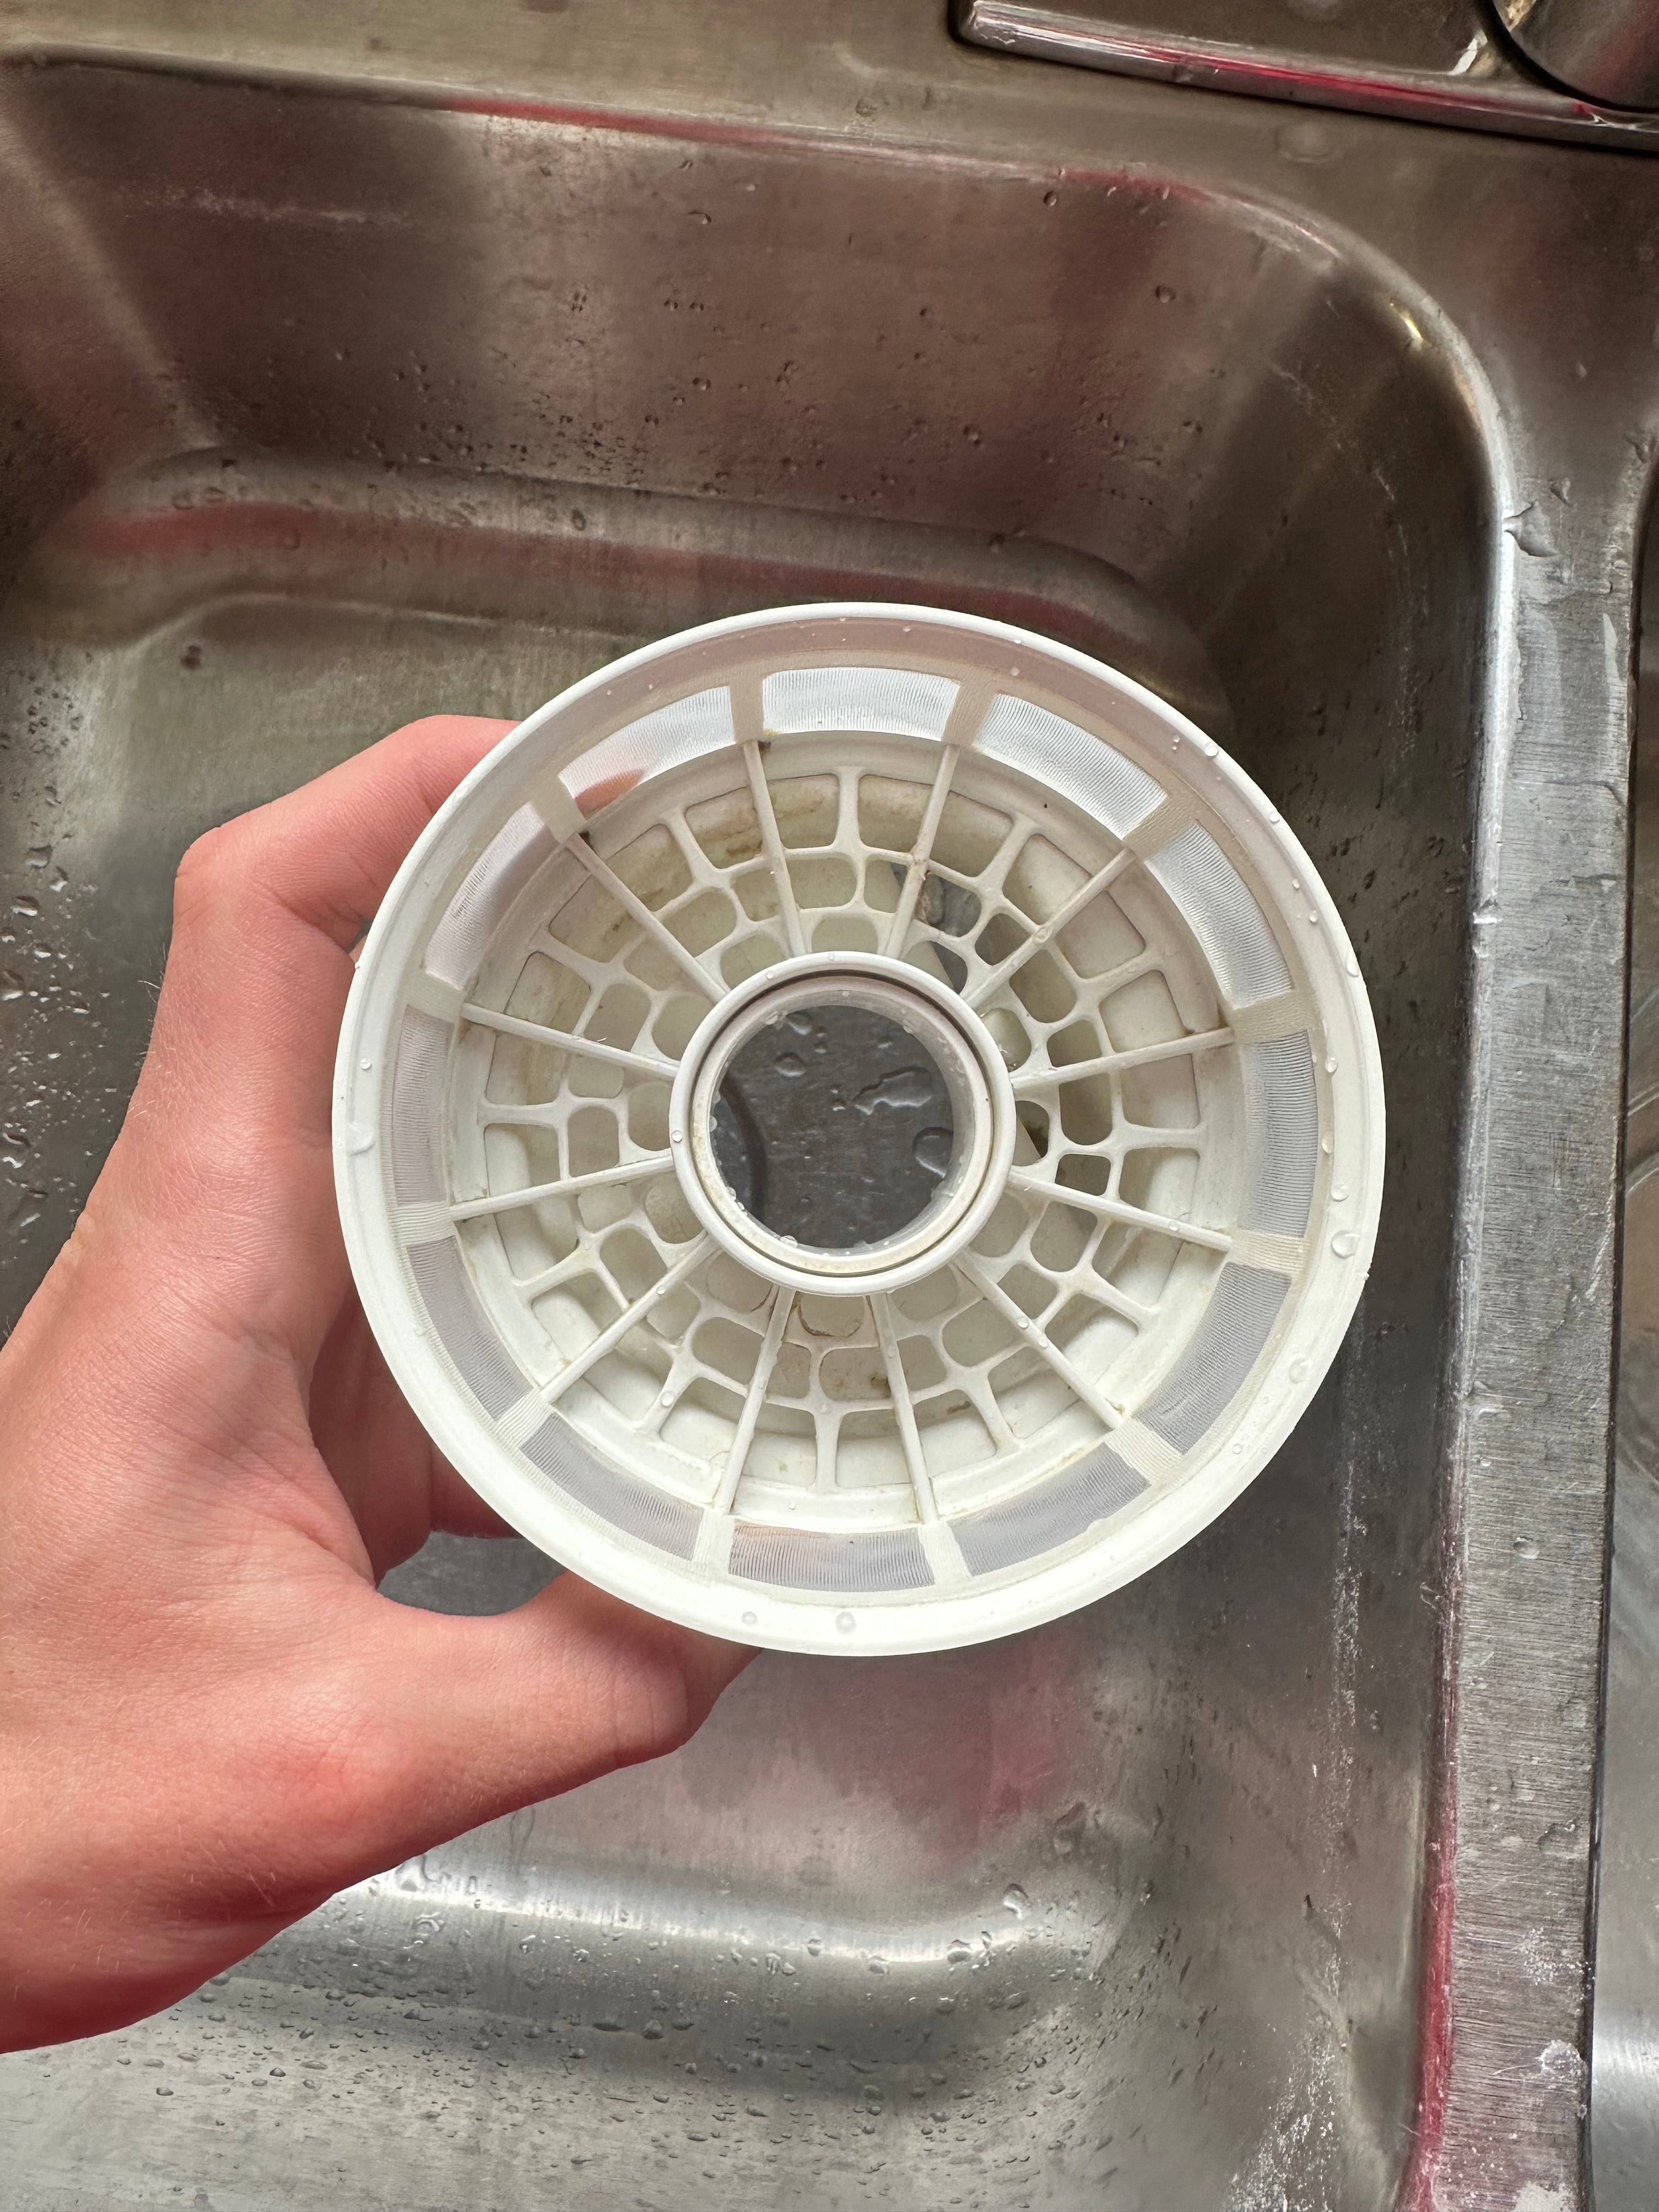 the center view of a dishwasher filter after it has been cleaned with Stain Solver